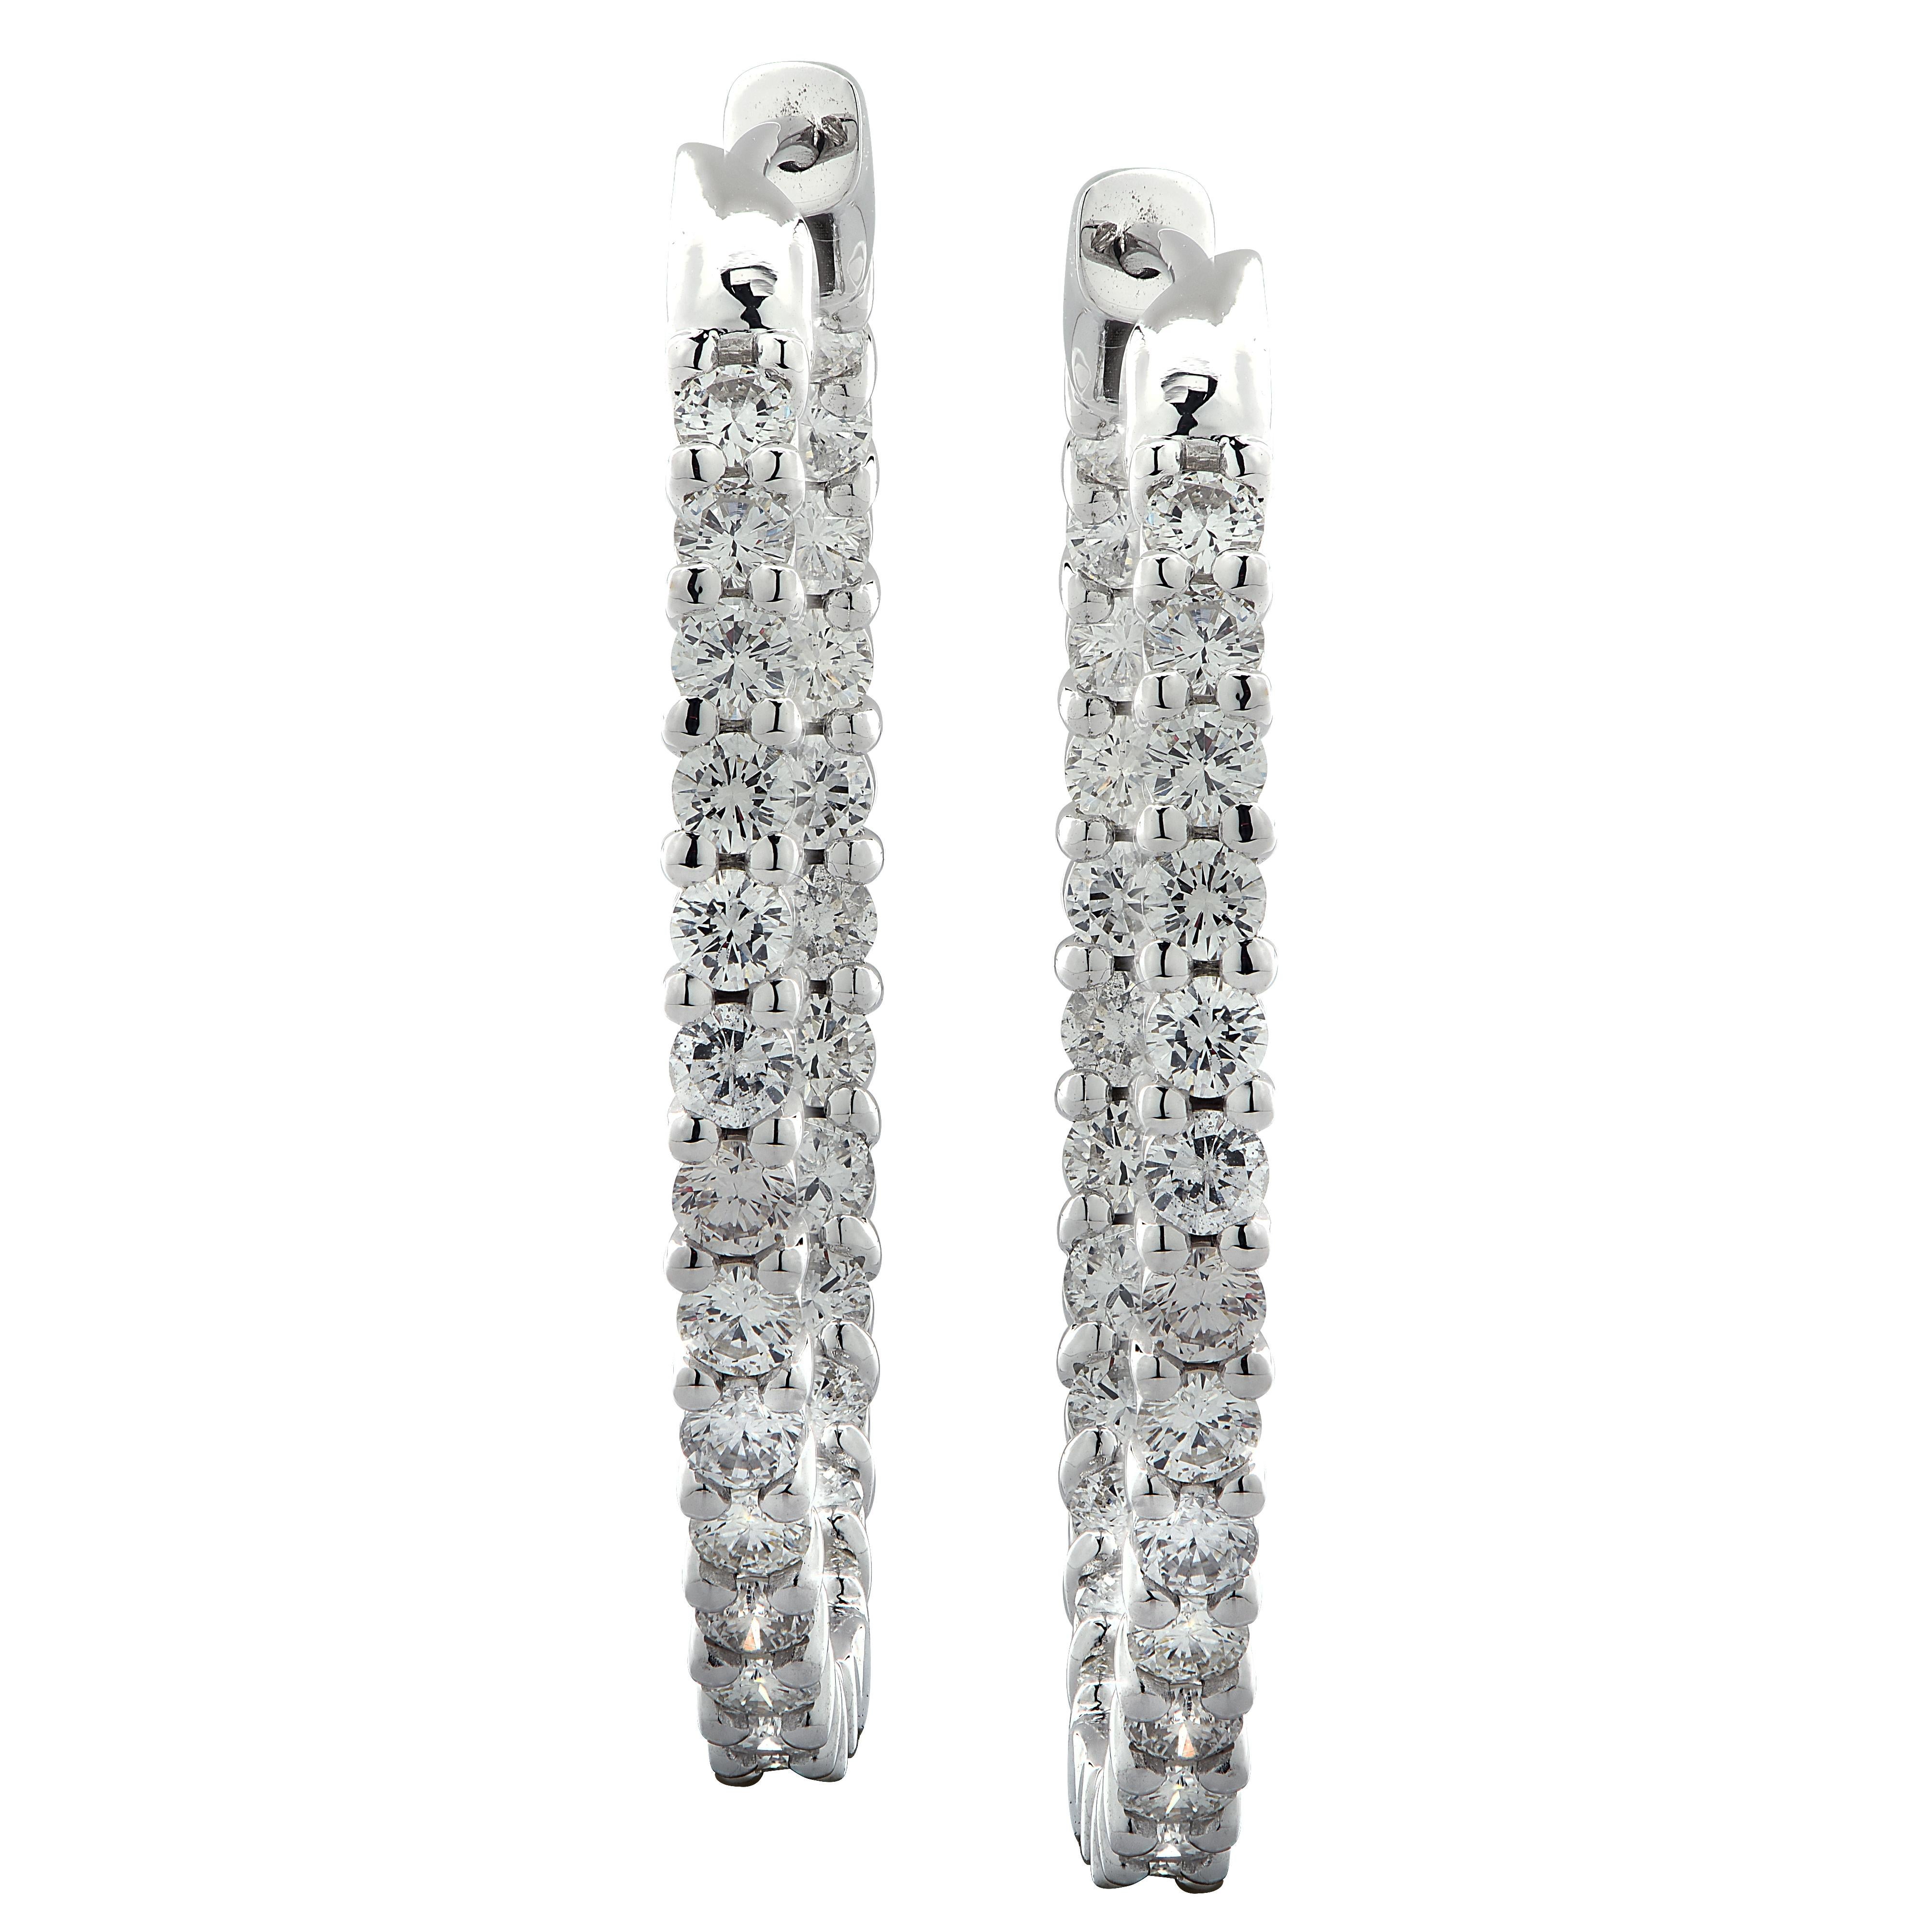 Spectacular Vivid Diamonds In/Out diamond hoop earrings crafted in 18 karat white gold showcasing 54 round brilliant cut diamonds weighing 2.83 carats total, G-H color, VS-SI clarity. Each diamond is carefully selected, perfectly matched and set on